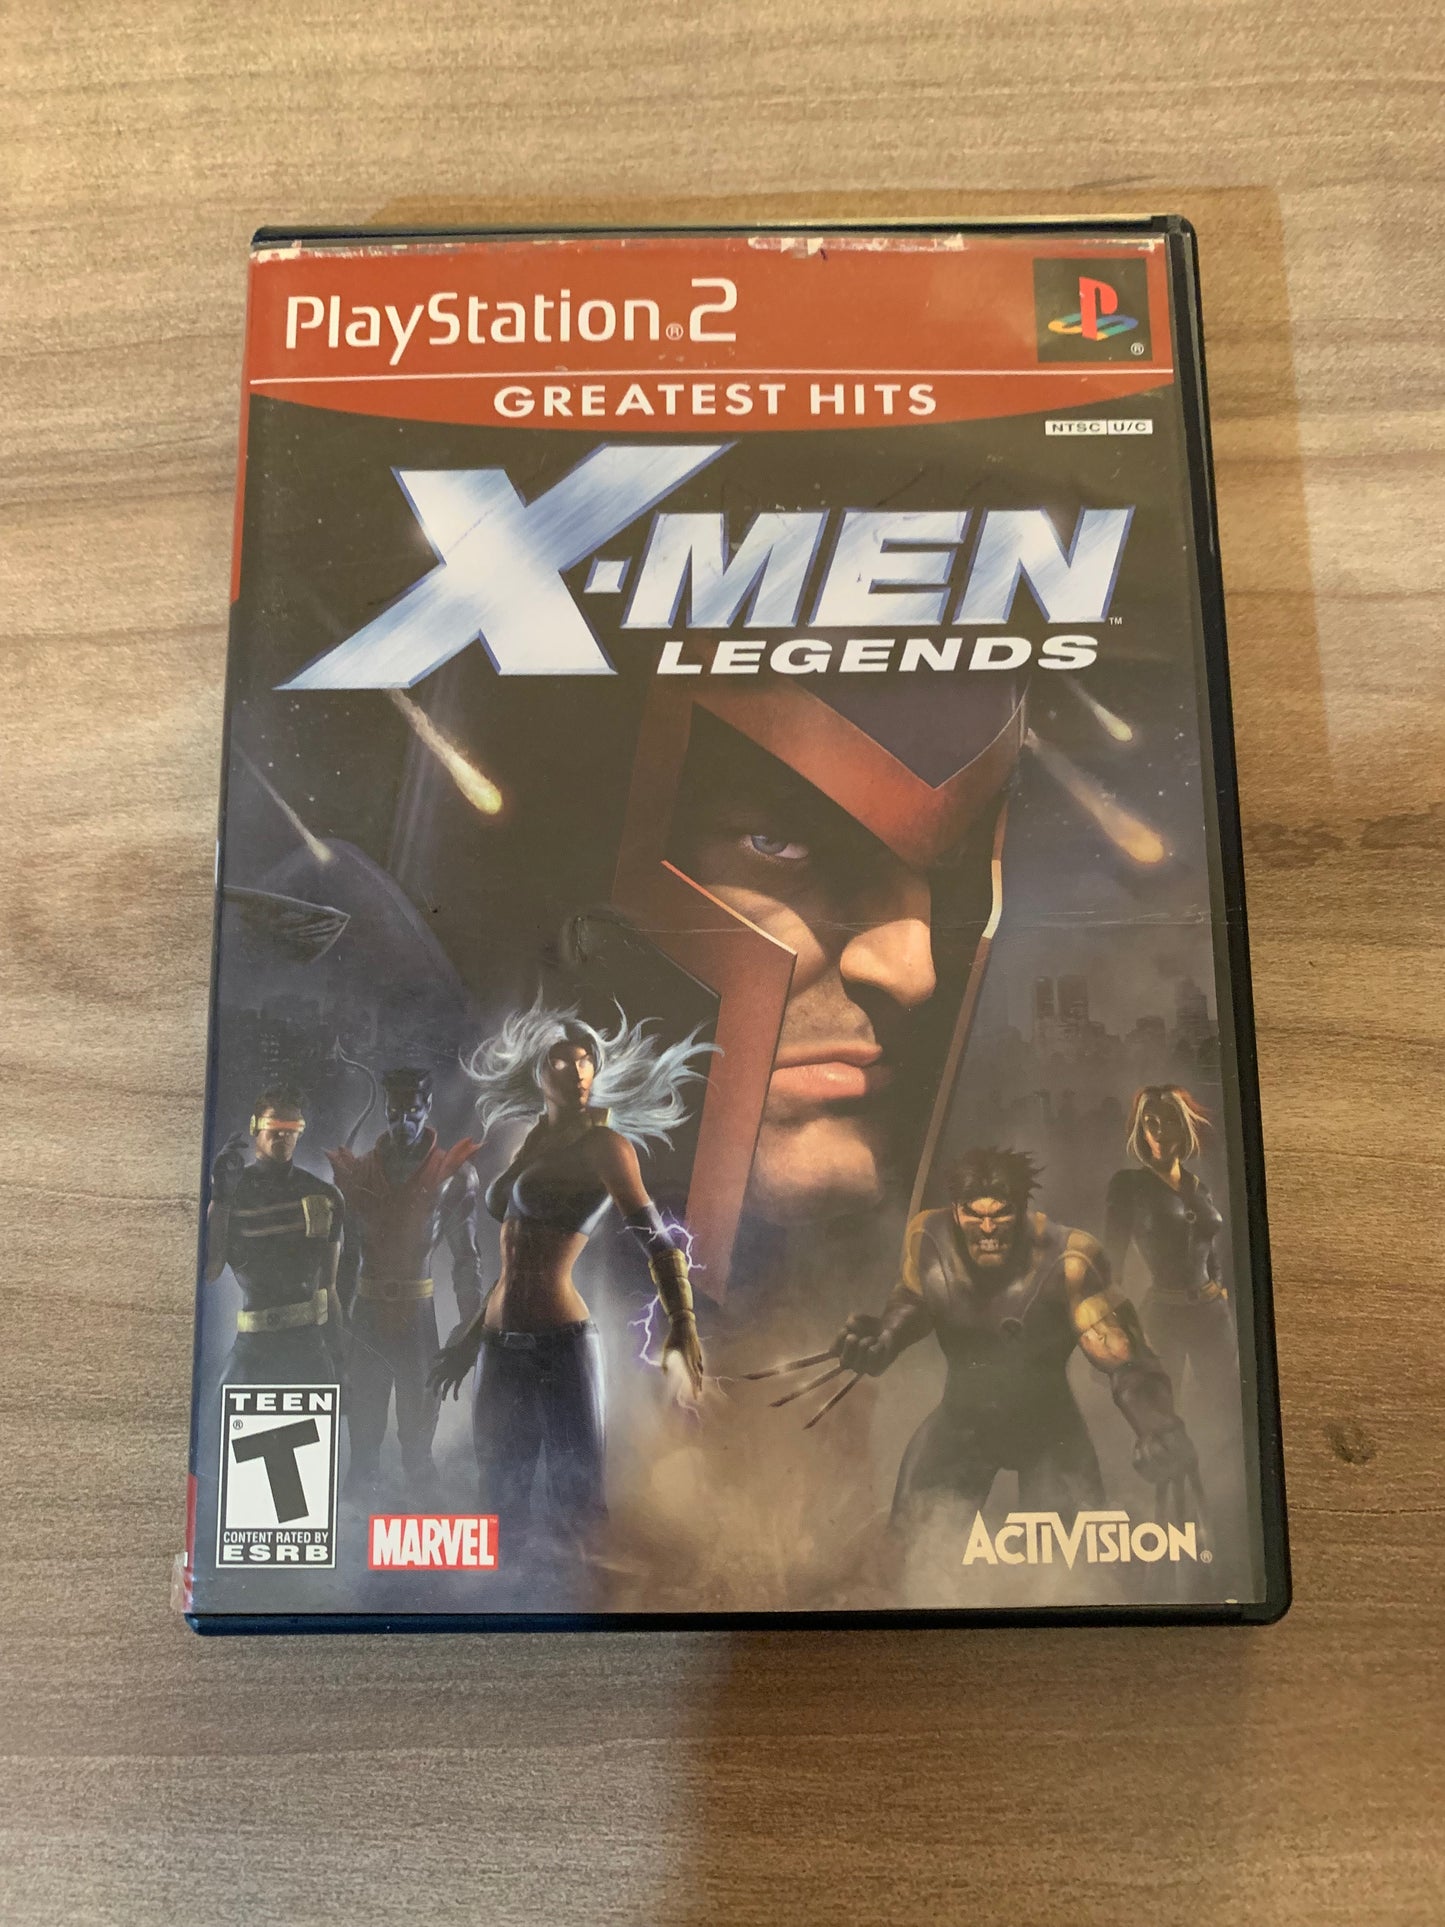 SONY PLAYSTATiON 2 [PS2] | X-MEN LEGENDS | GREATEST HiTS